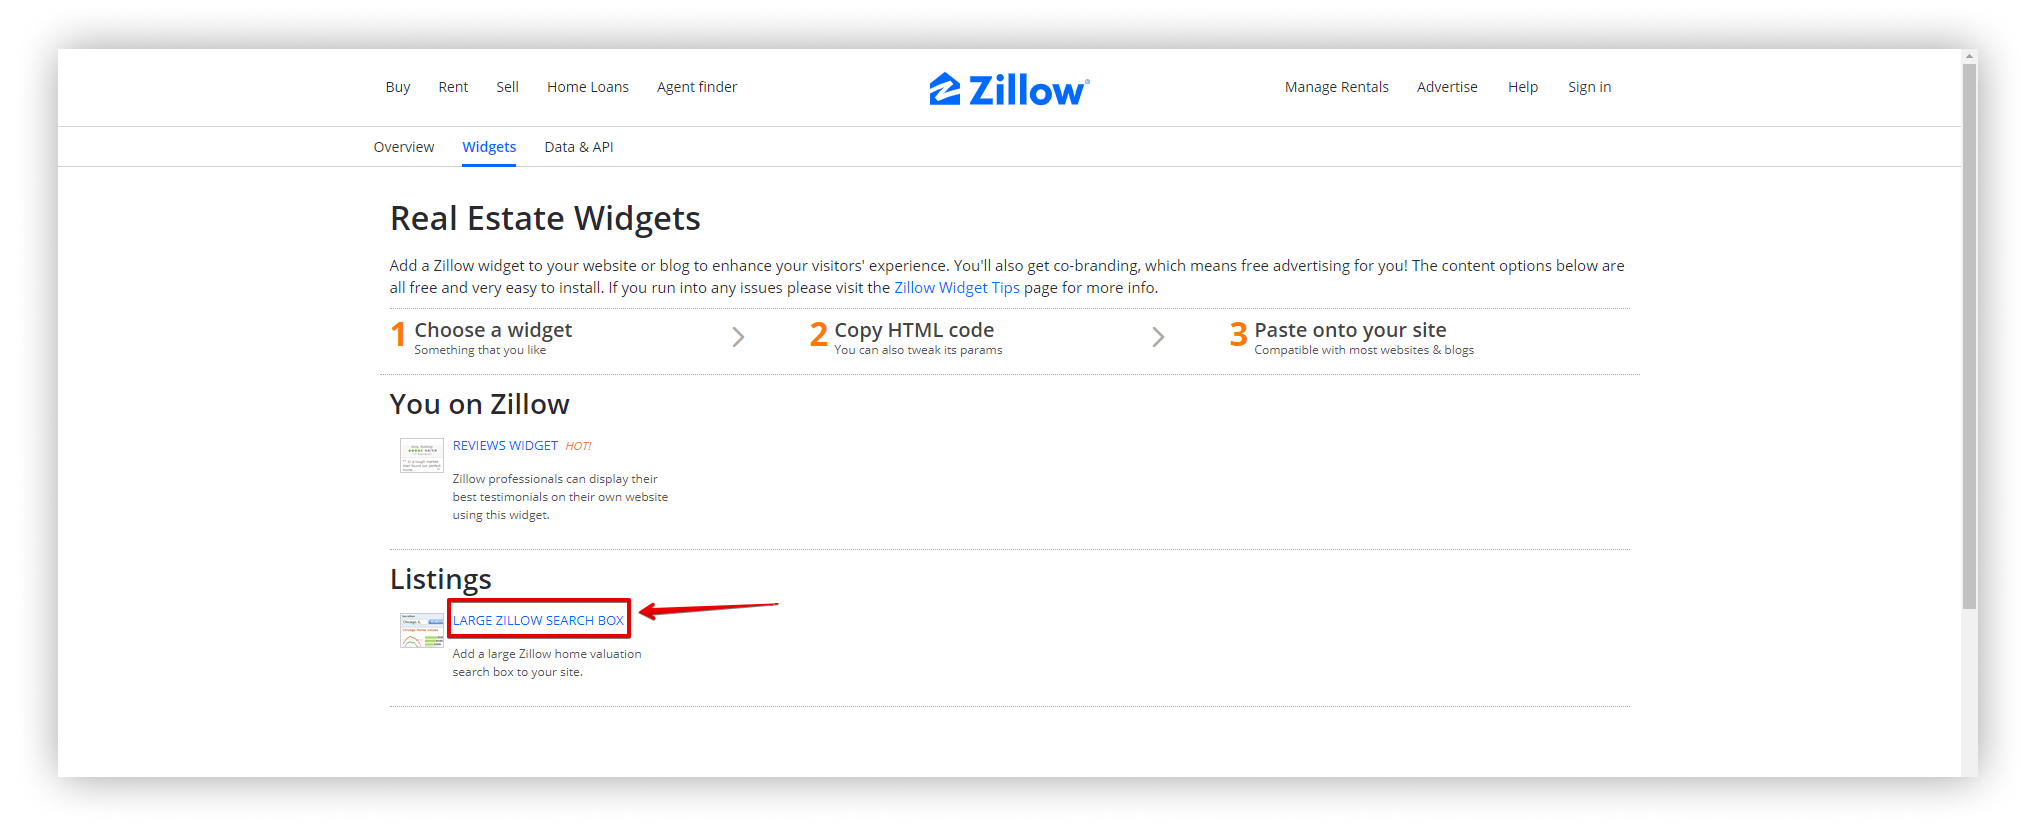 Click on LARGE ZILLOW SEARCH BOX.